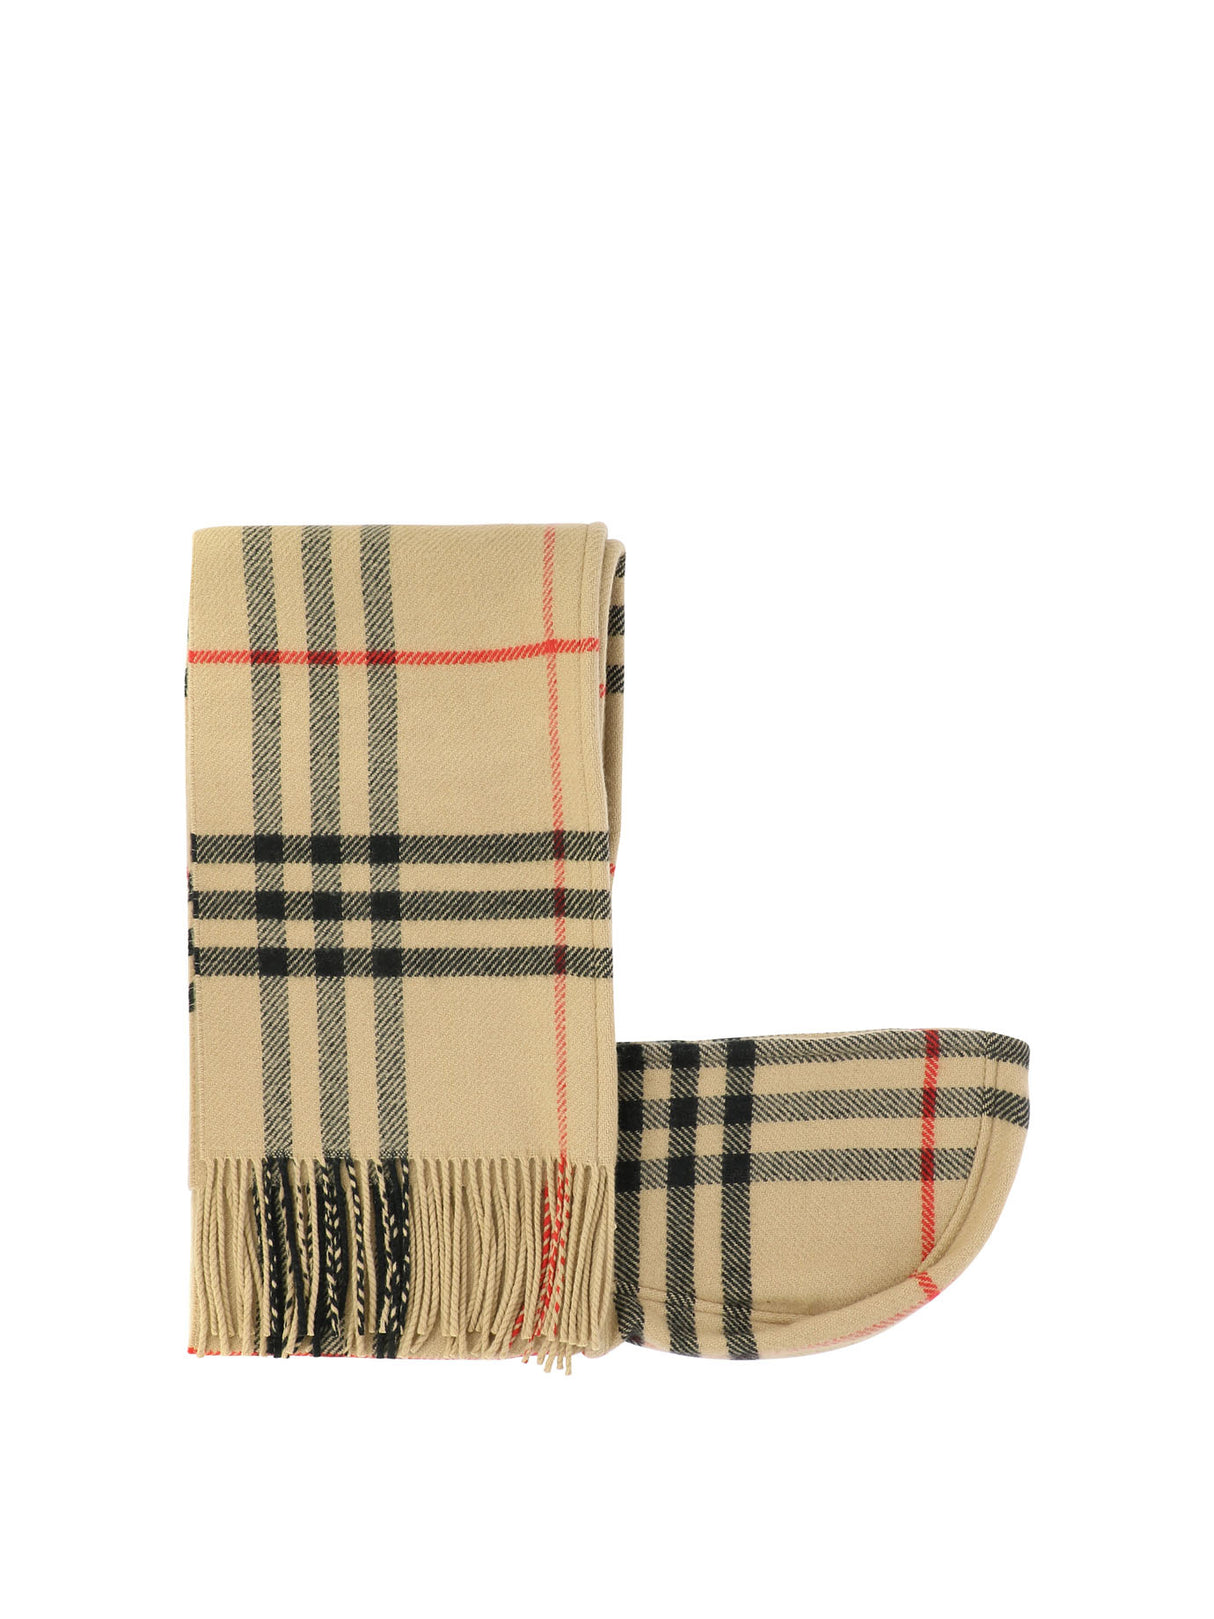 BURBERRY Luxurious Wool Cashmere Hooded Scarf for Men - Beige